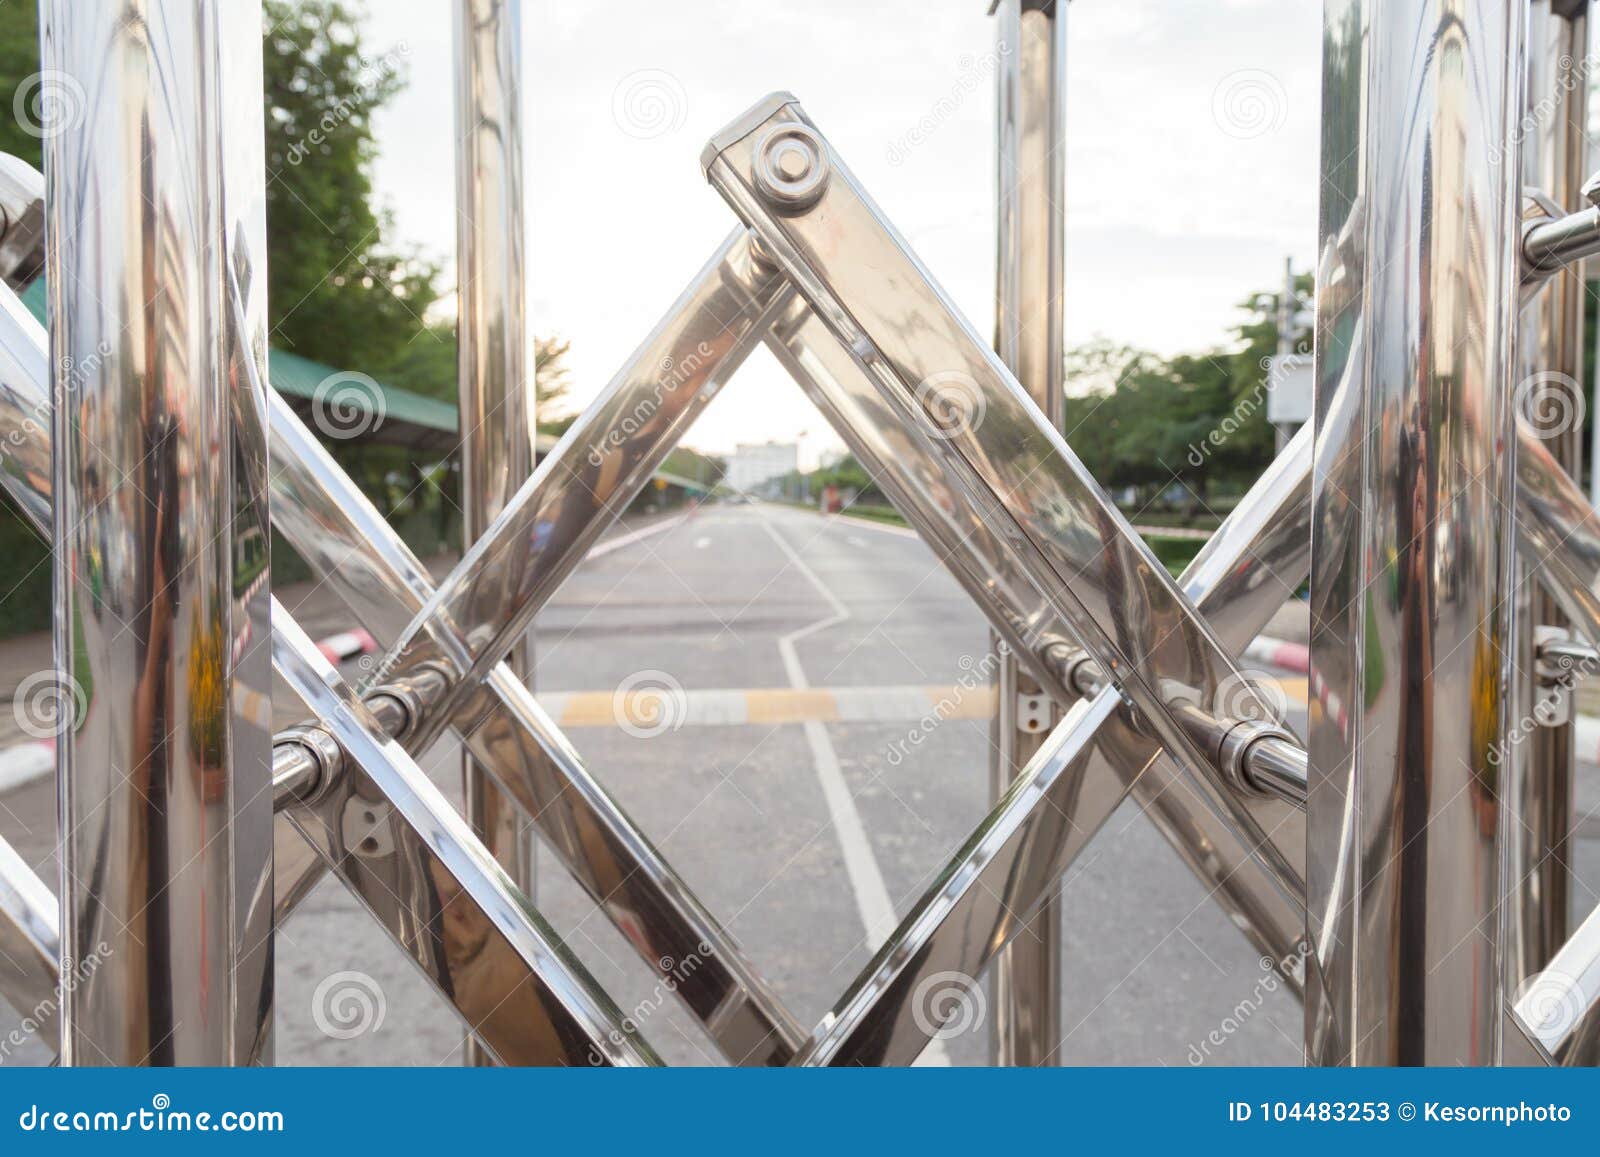 aluminum fence luster it is used for shutting down entrances and exits in places